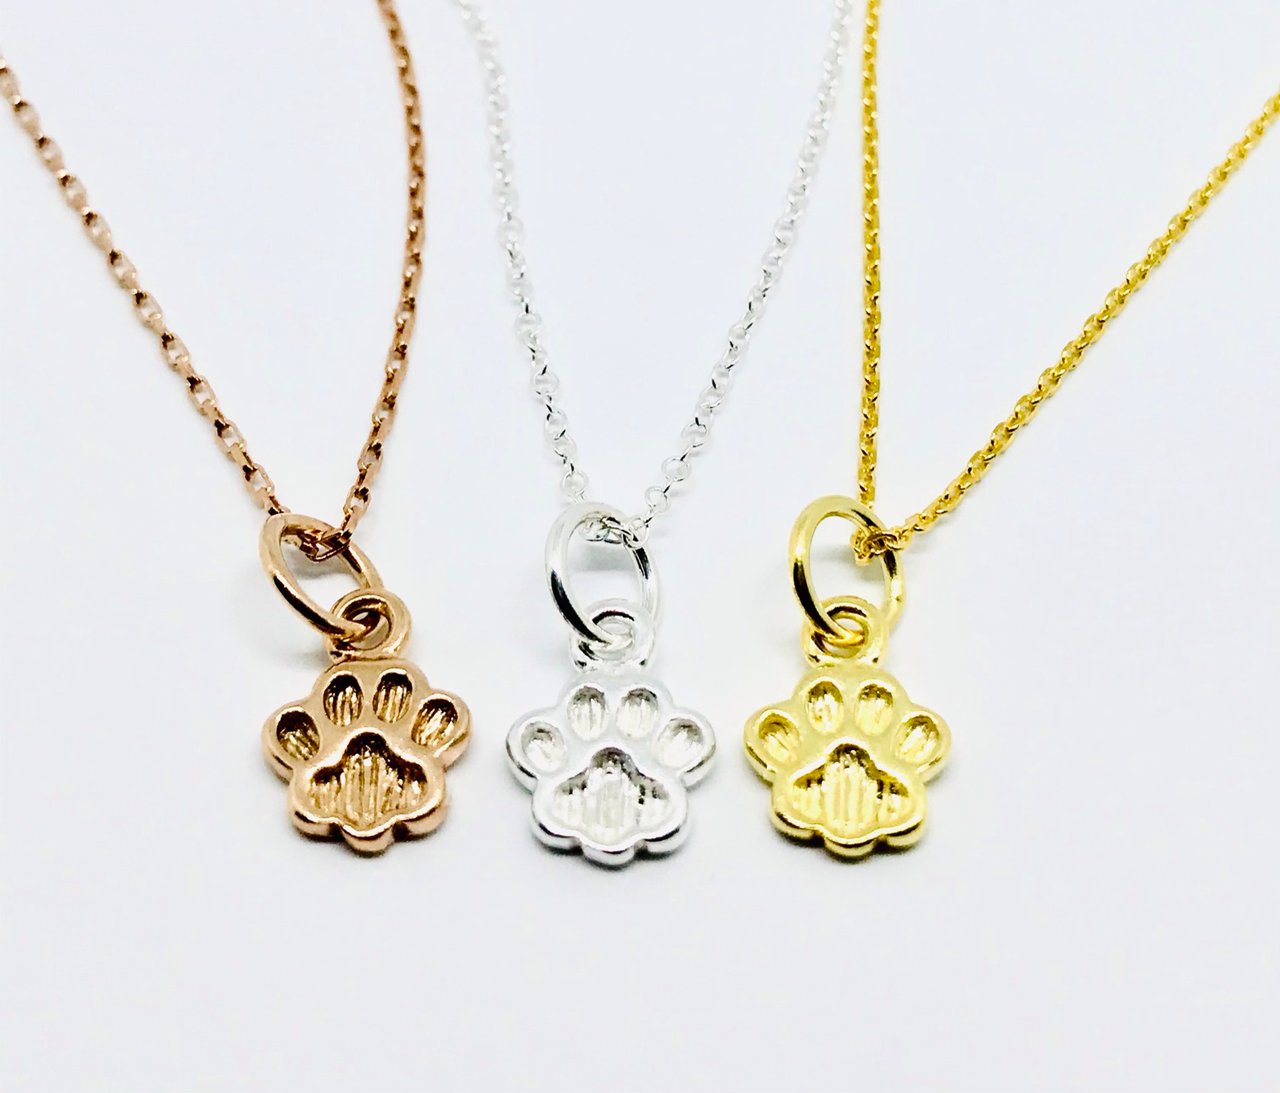 Shop for a 14k Gold Paw Print Heart Pendant for the Pet lover in your life  - J.H. Breakell and Co.